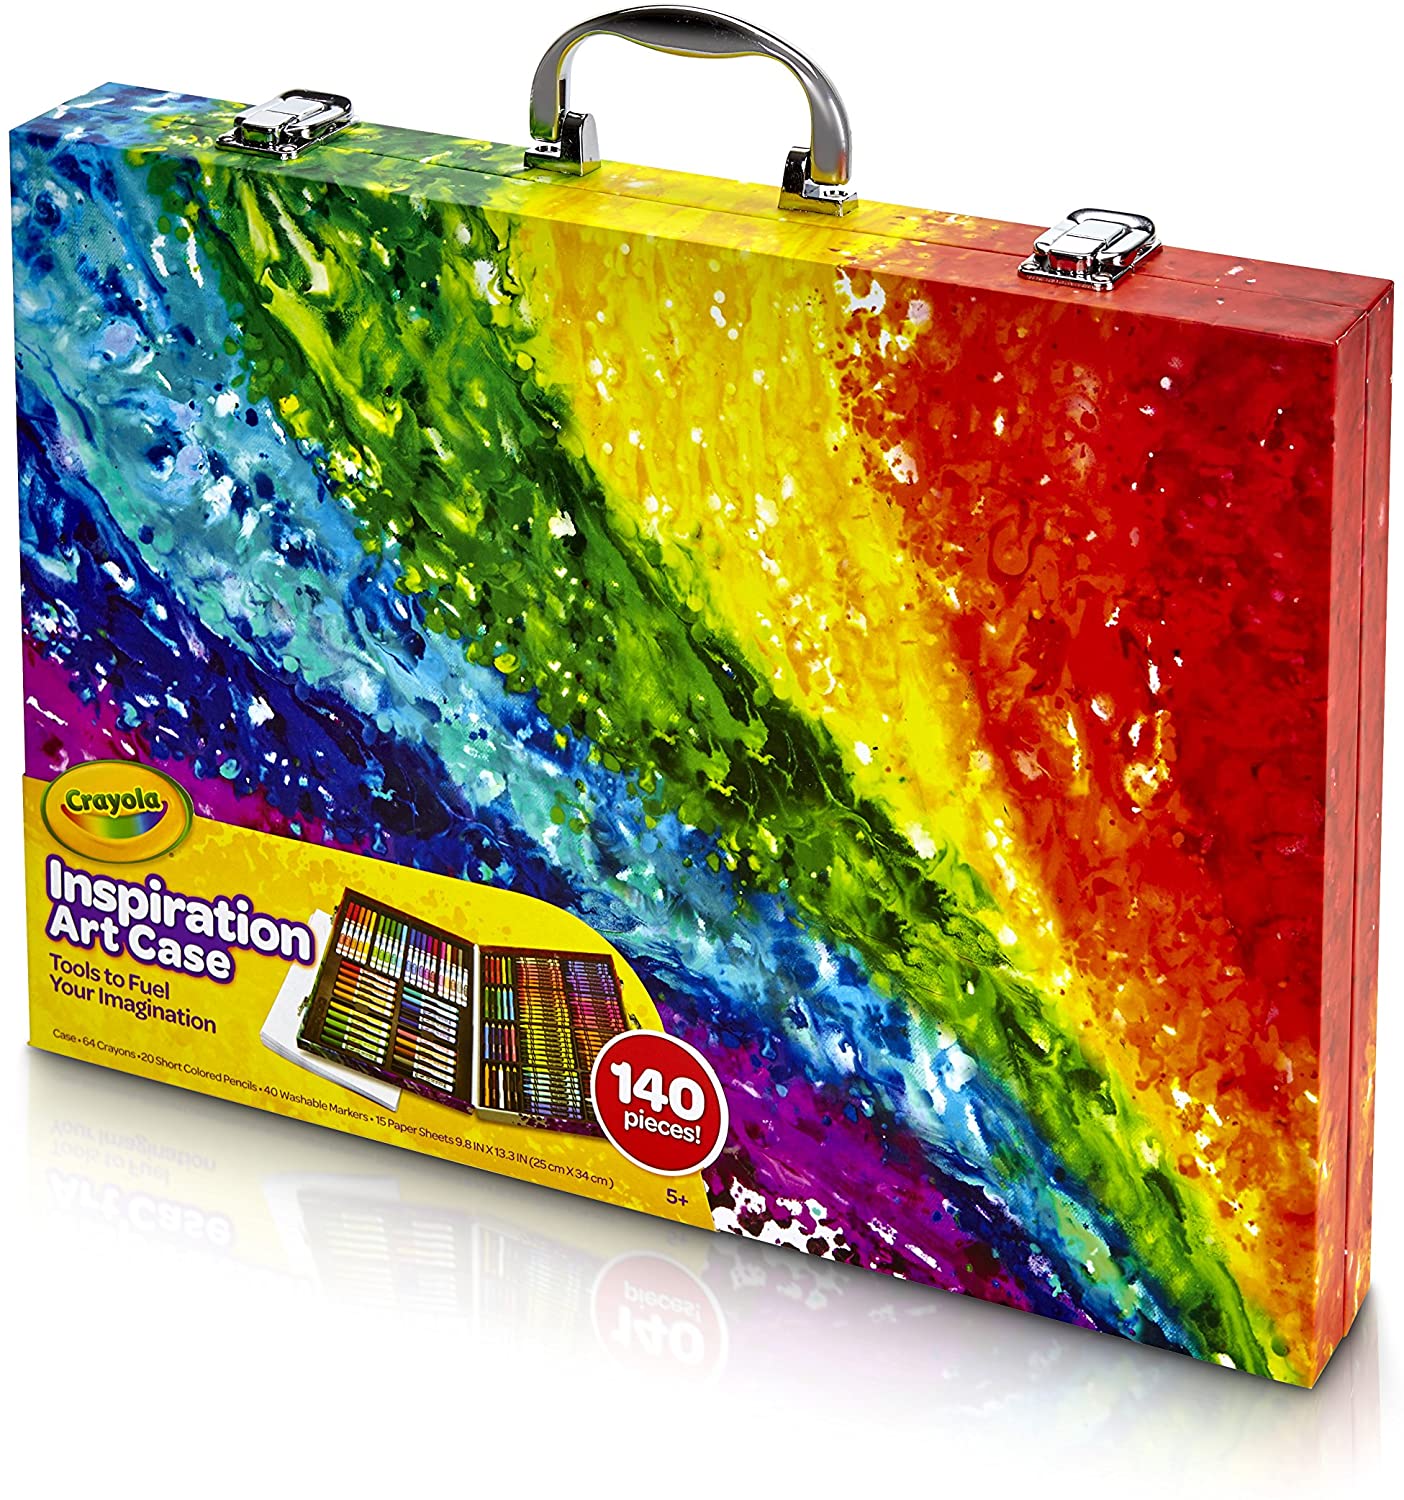 Crayola Inspiration Art Set Tools to Fuel Your Imagination for sale online